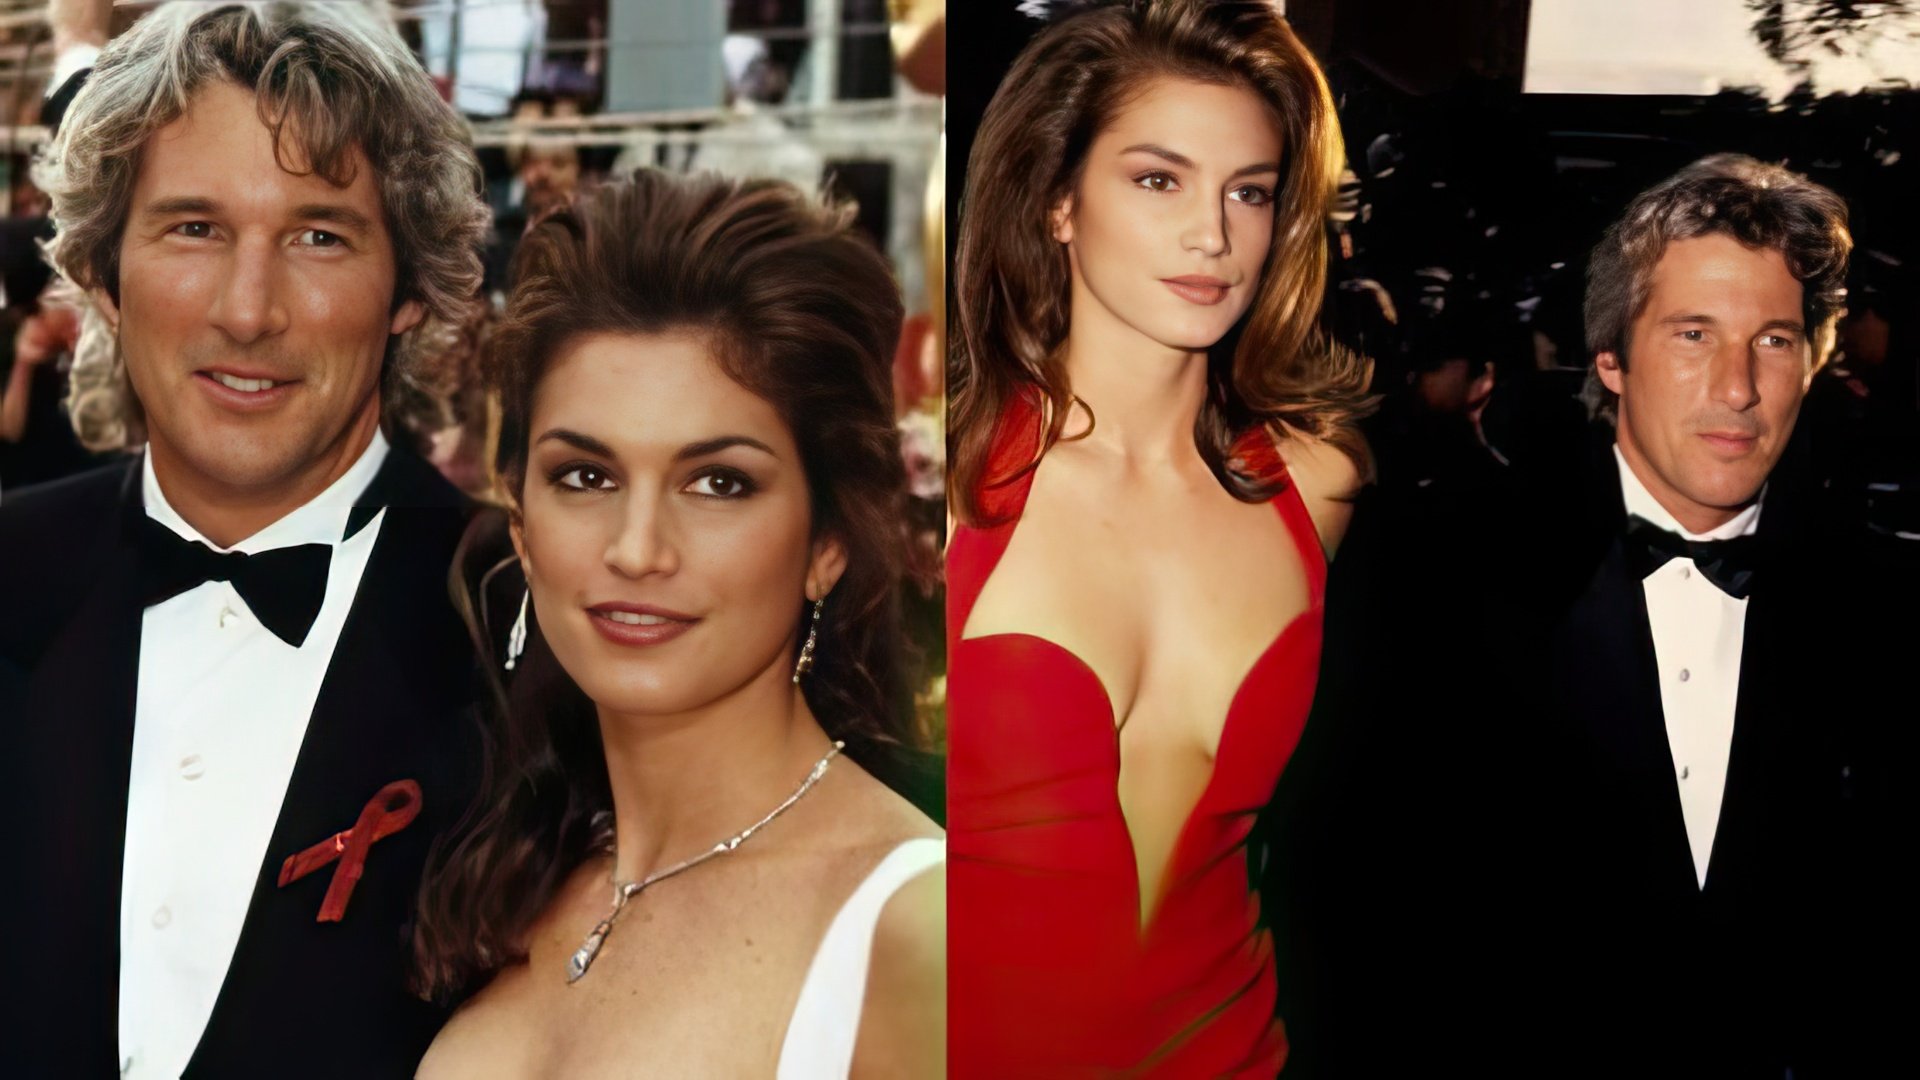 Richard Gere was married to Cindy Crawford